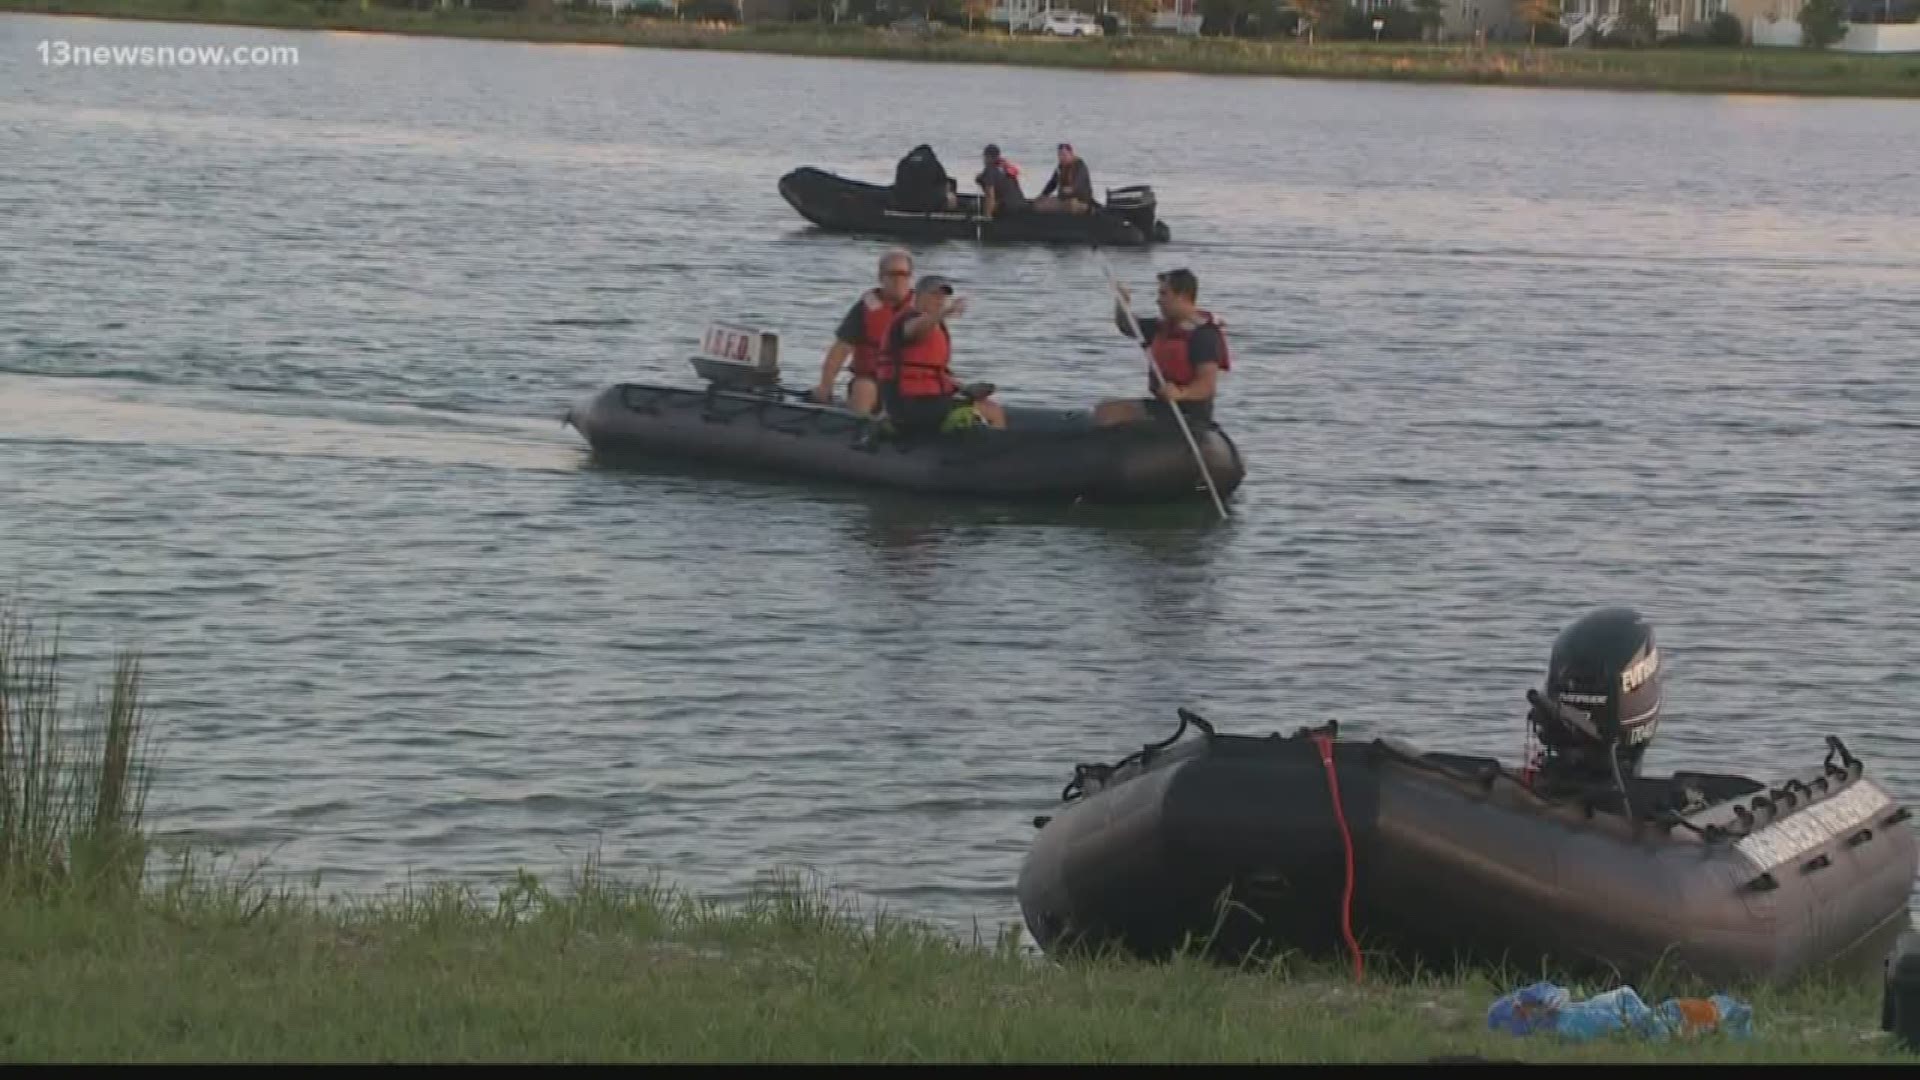 Two people were canoeing on the lake when the boat started taking on water and capsized. One person made it to shore, but the other disappeared.